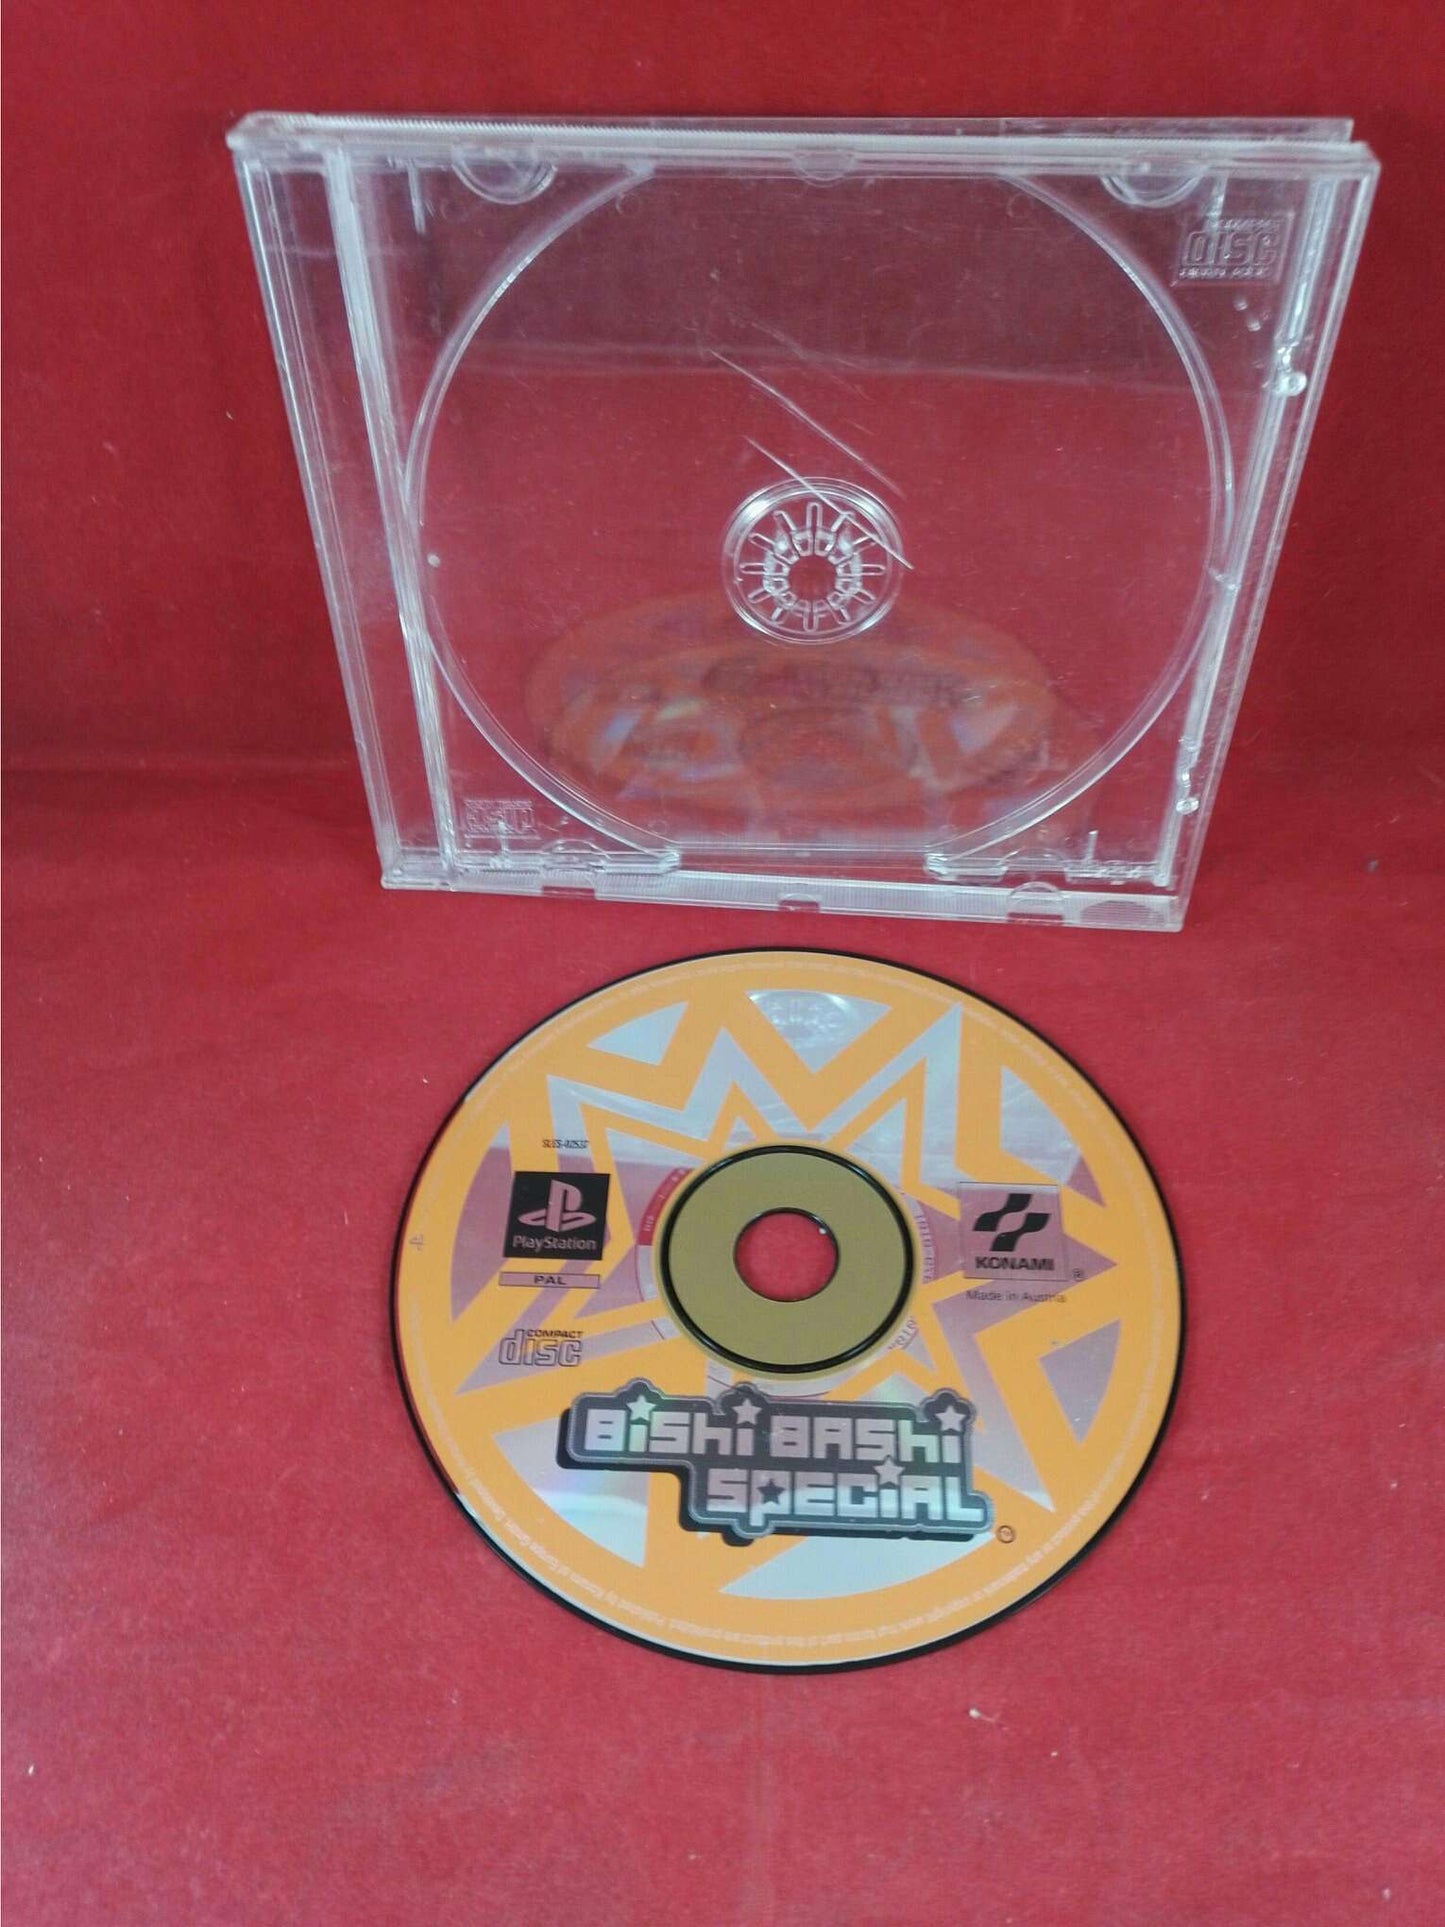 Bishi Bashi Sony Playstation 1 (PS1) Game Disc Only